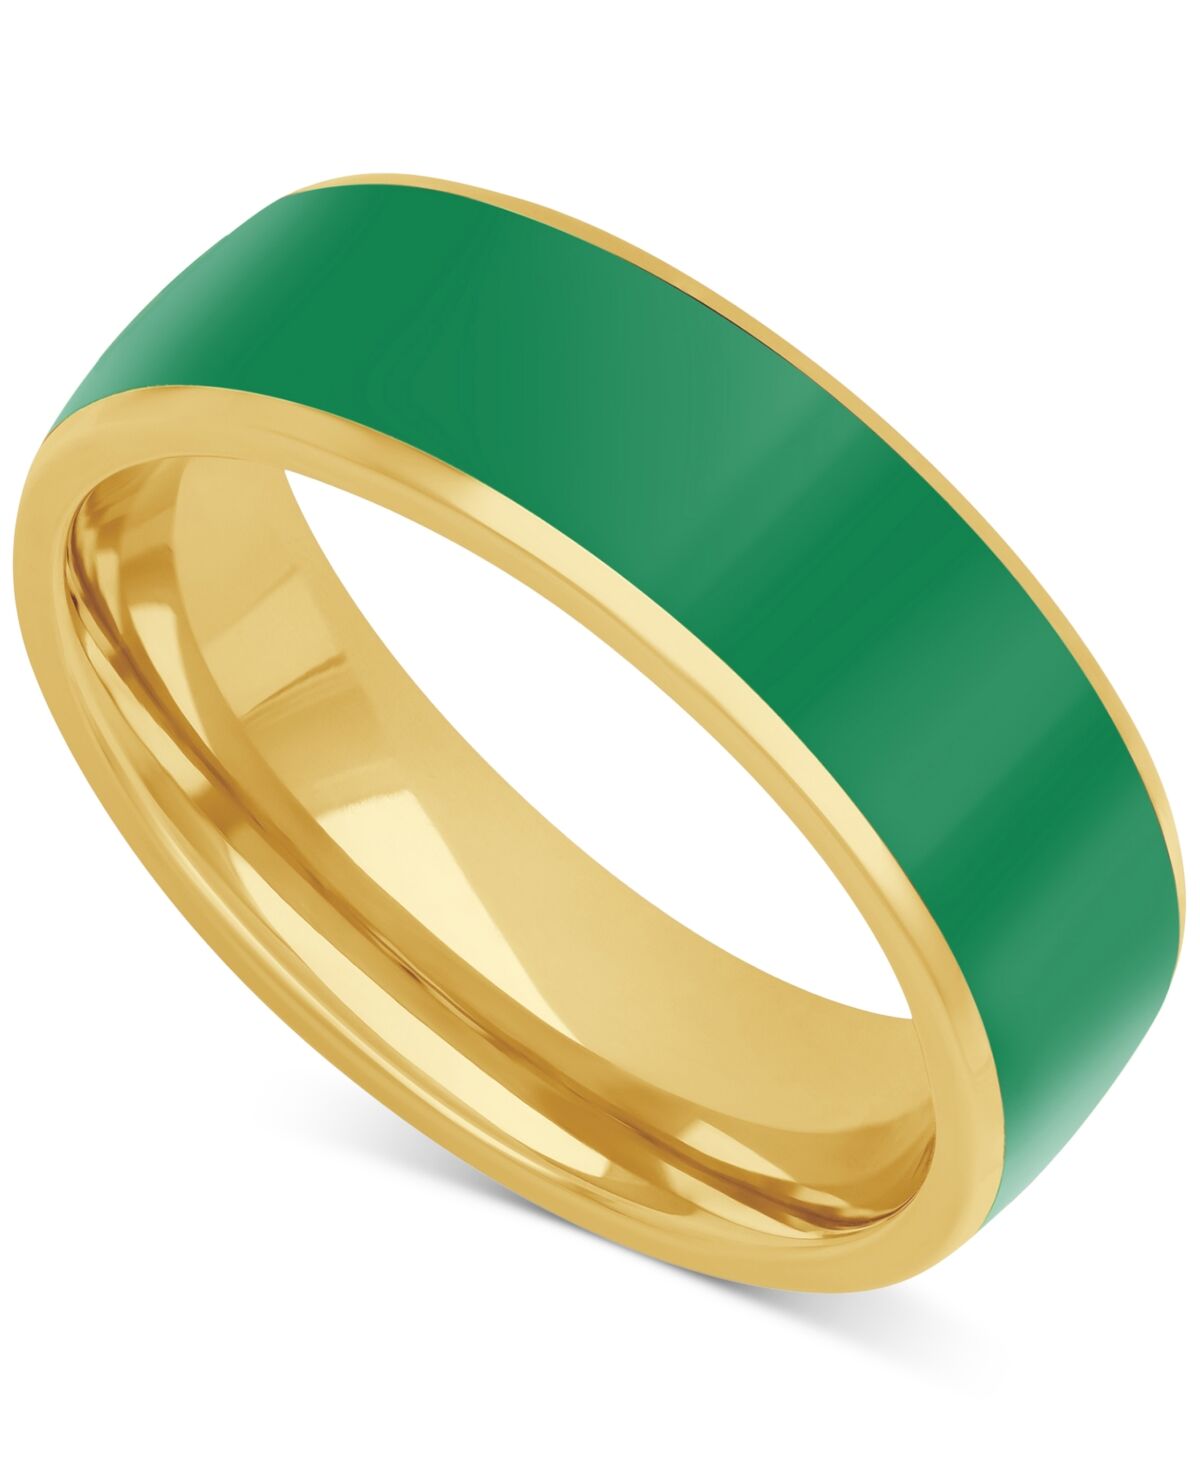 Macy's Men's Black Ceramic Inlay Low Dome Band in 18k Yellow Gold-Plated Sterling Silver - Green